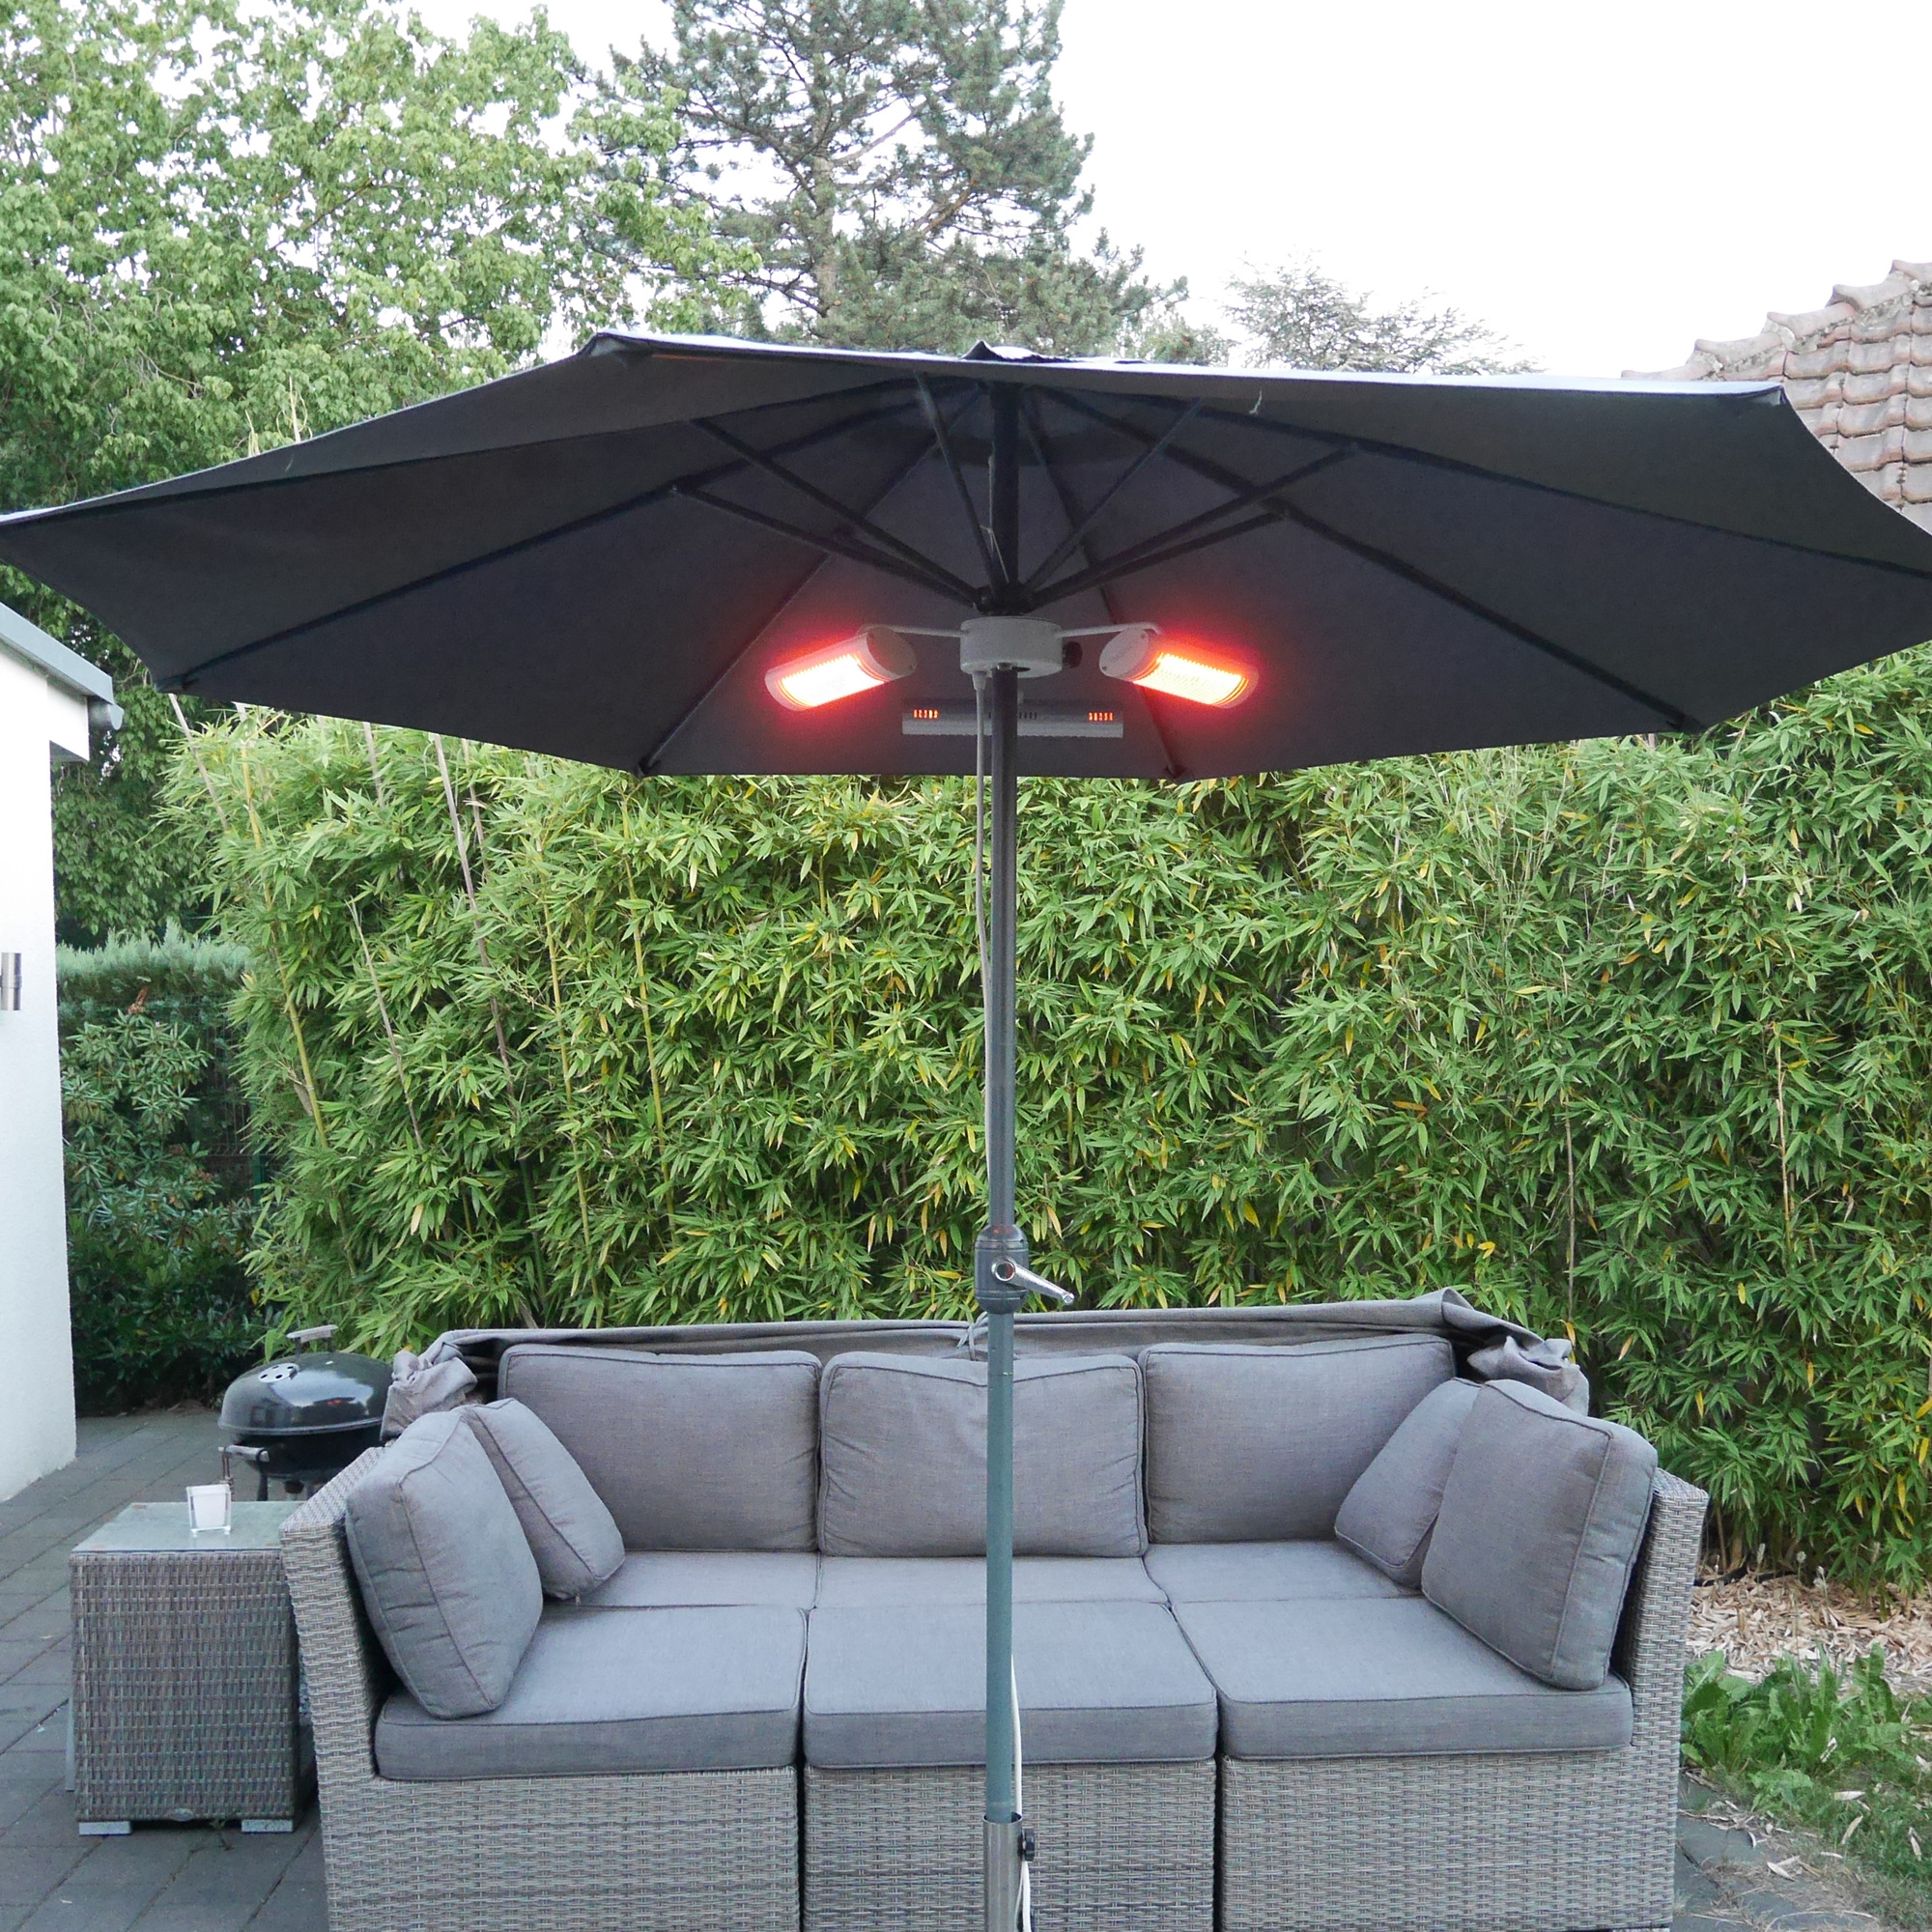 Parasol-patio-heater-high-quality-for-home-or-professional-restaurant-catering-industry